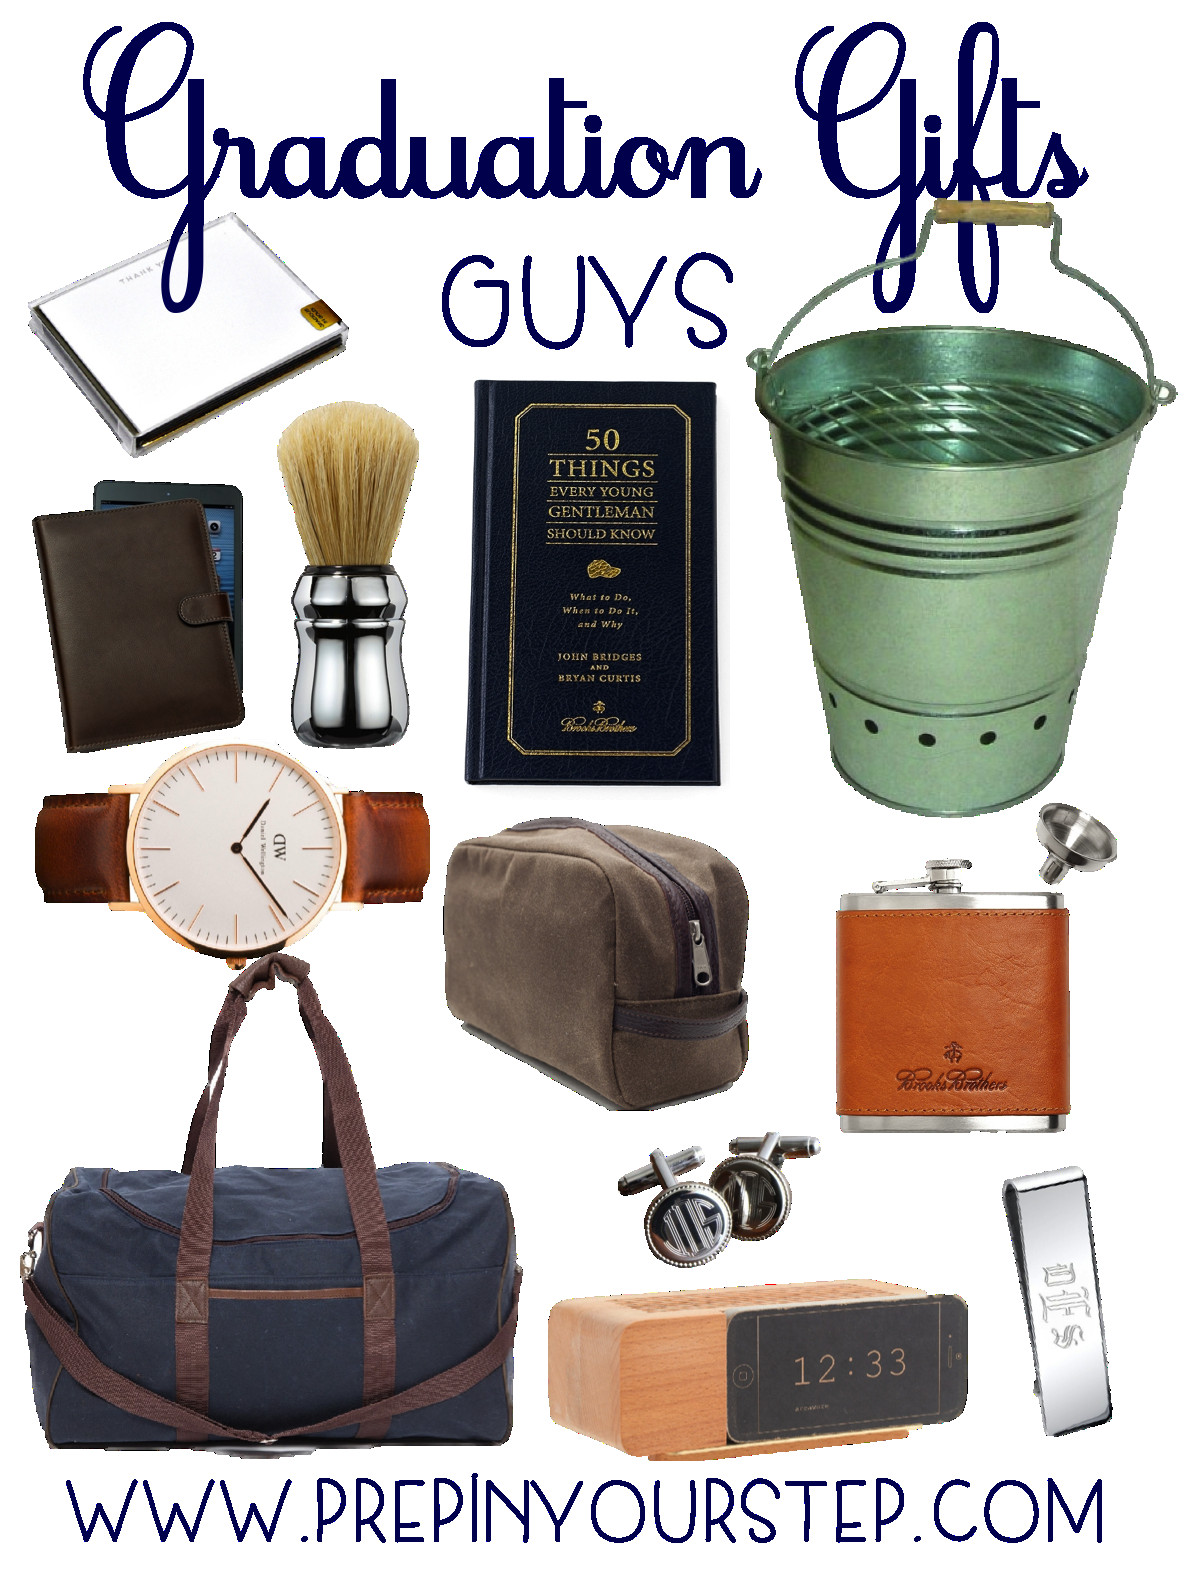 Christmas Gift Ideas For College Guys
 Graduation Gift Ideas Guys & Girls Prep In Your Step